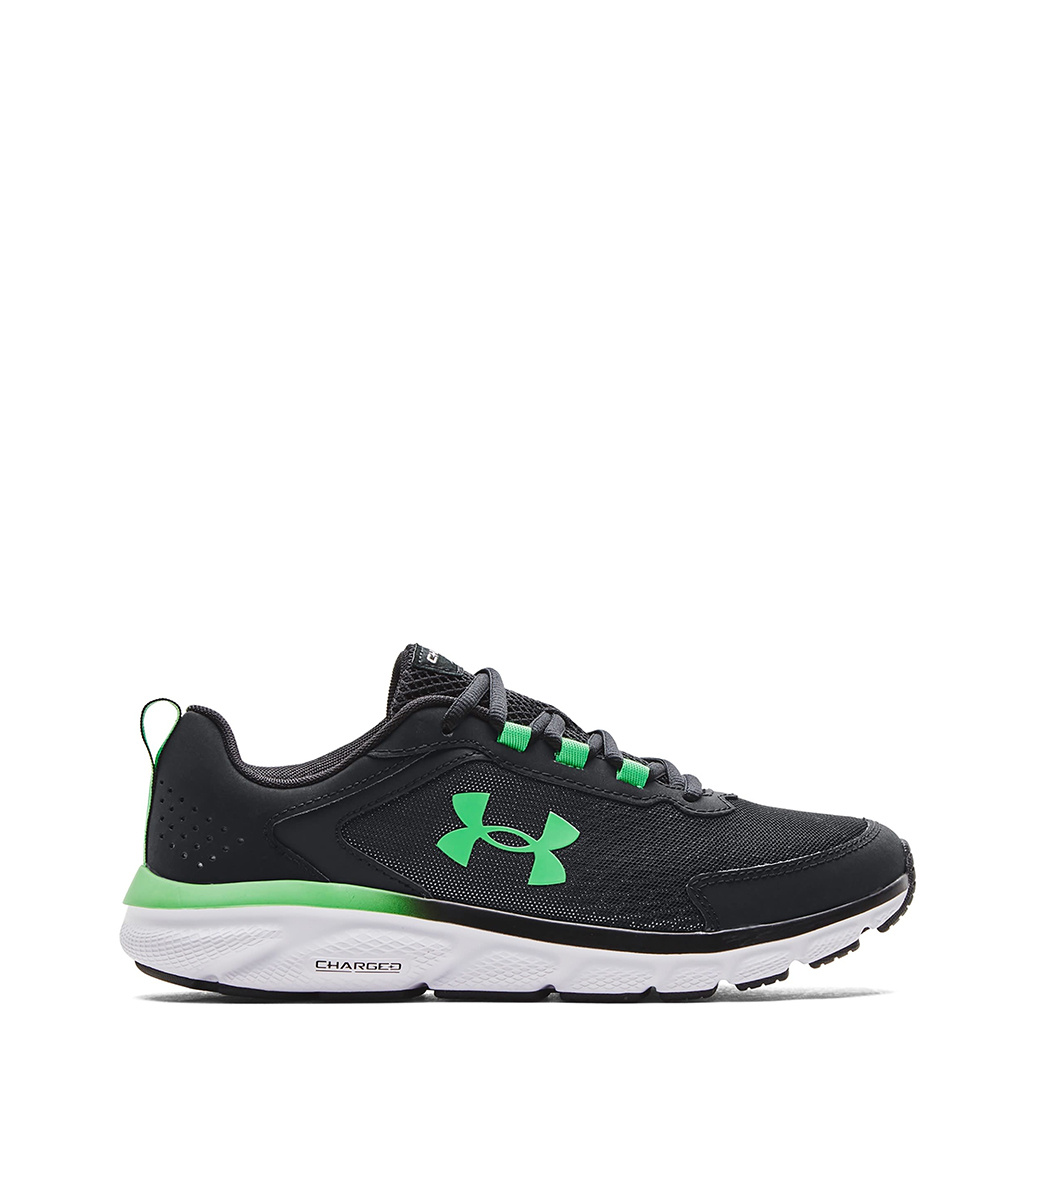 UNDER ARMOUR CHARGED ASSERT 9 BLACK / GREEN